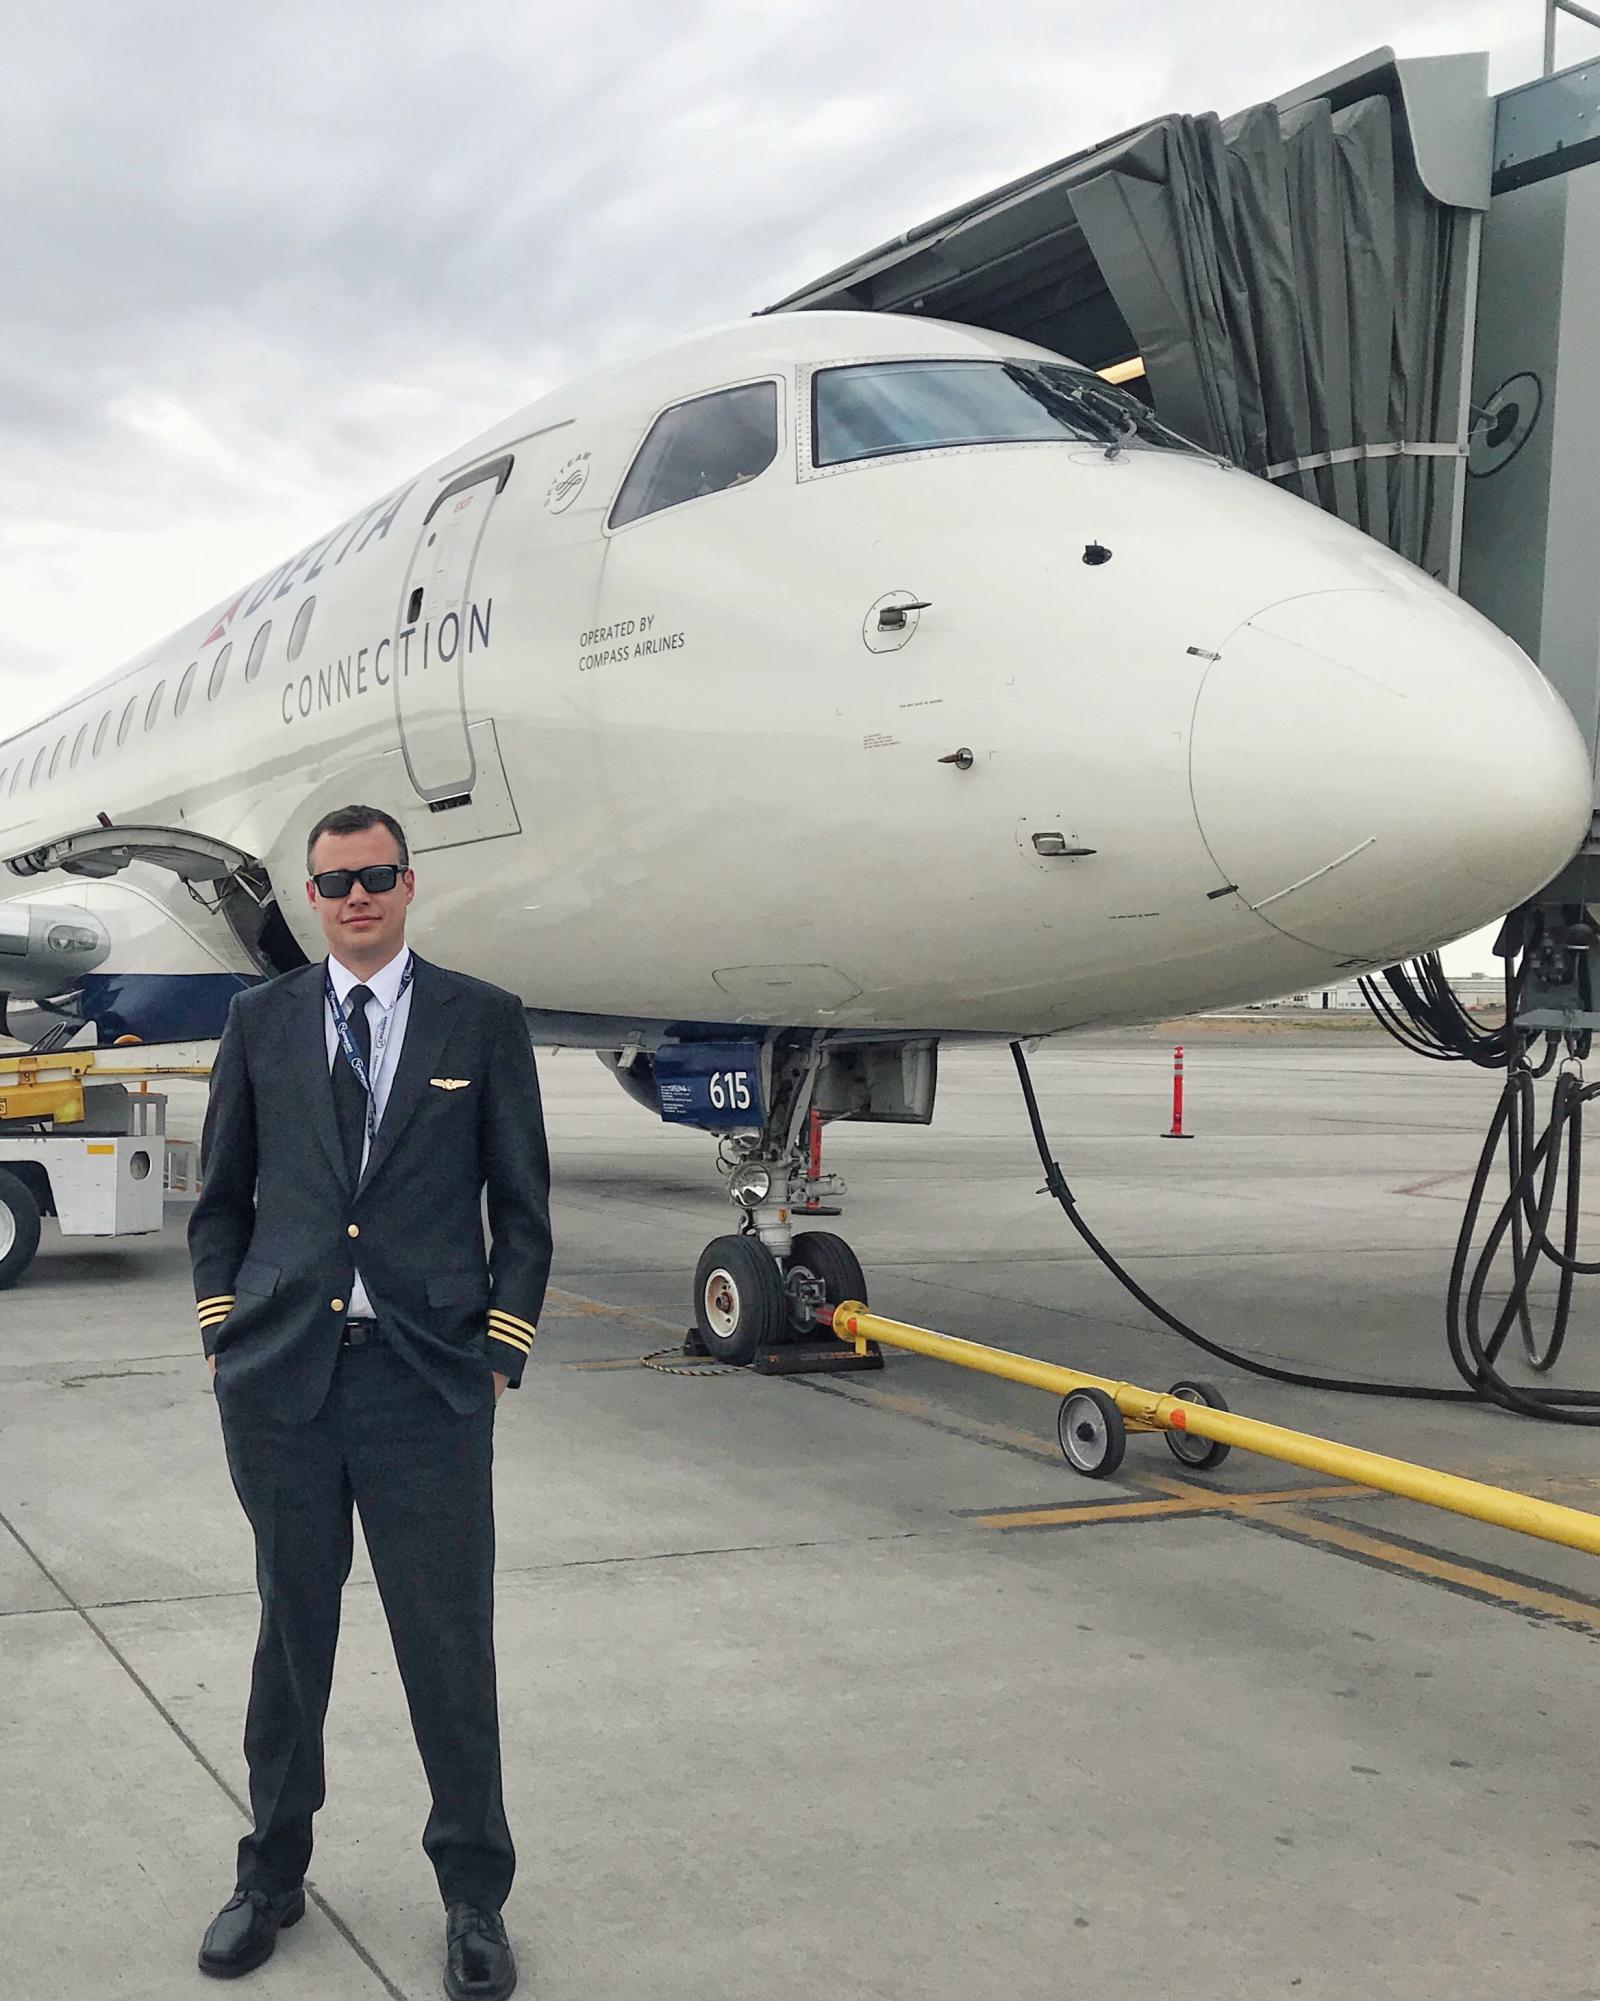 Litchfield has been all over the world thanks to his piloting job. “We go to Central America, Mexico, Canada and sometimes even Europe,” Litchfield said. 